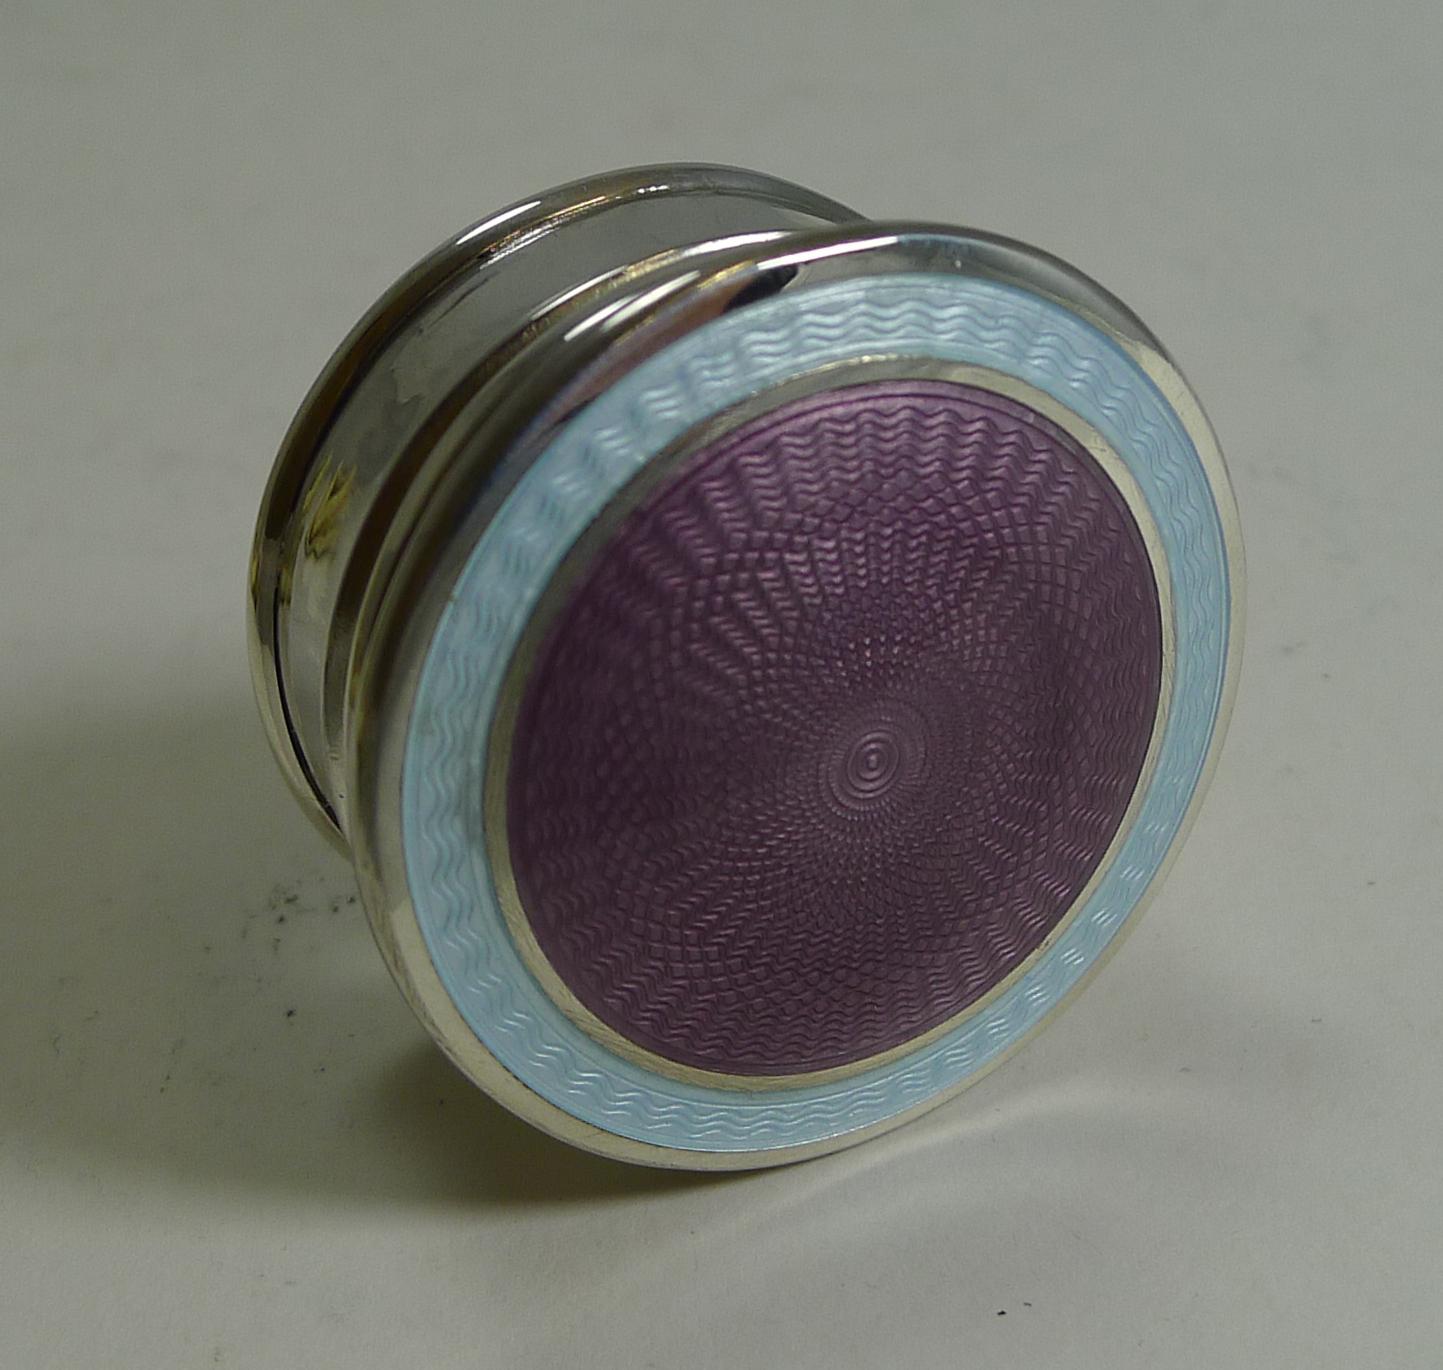 Superb Antique English Sterling Silver and Guilloche Enamel Pill Box 1